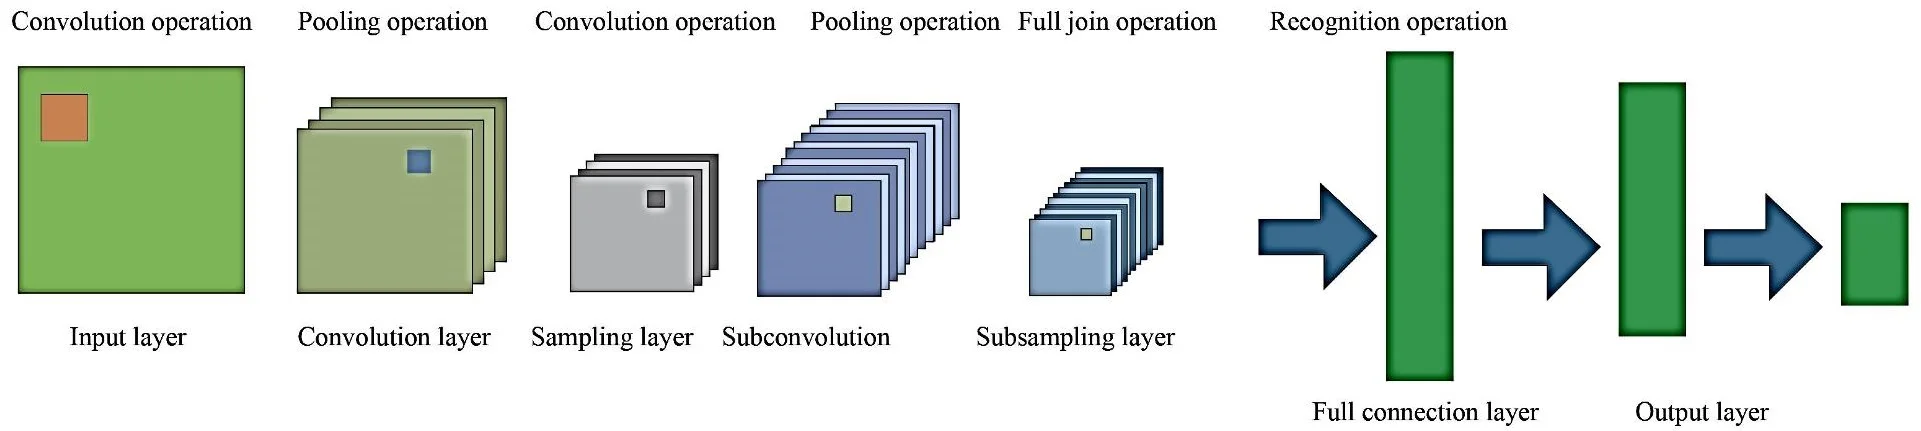 Analysis on transformer vibration signal recognition based on convolutional neural network